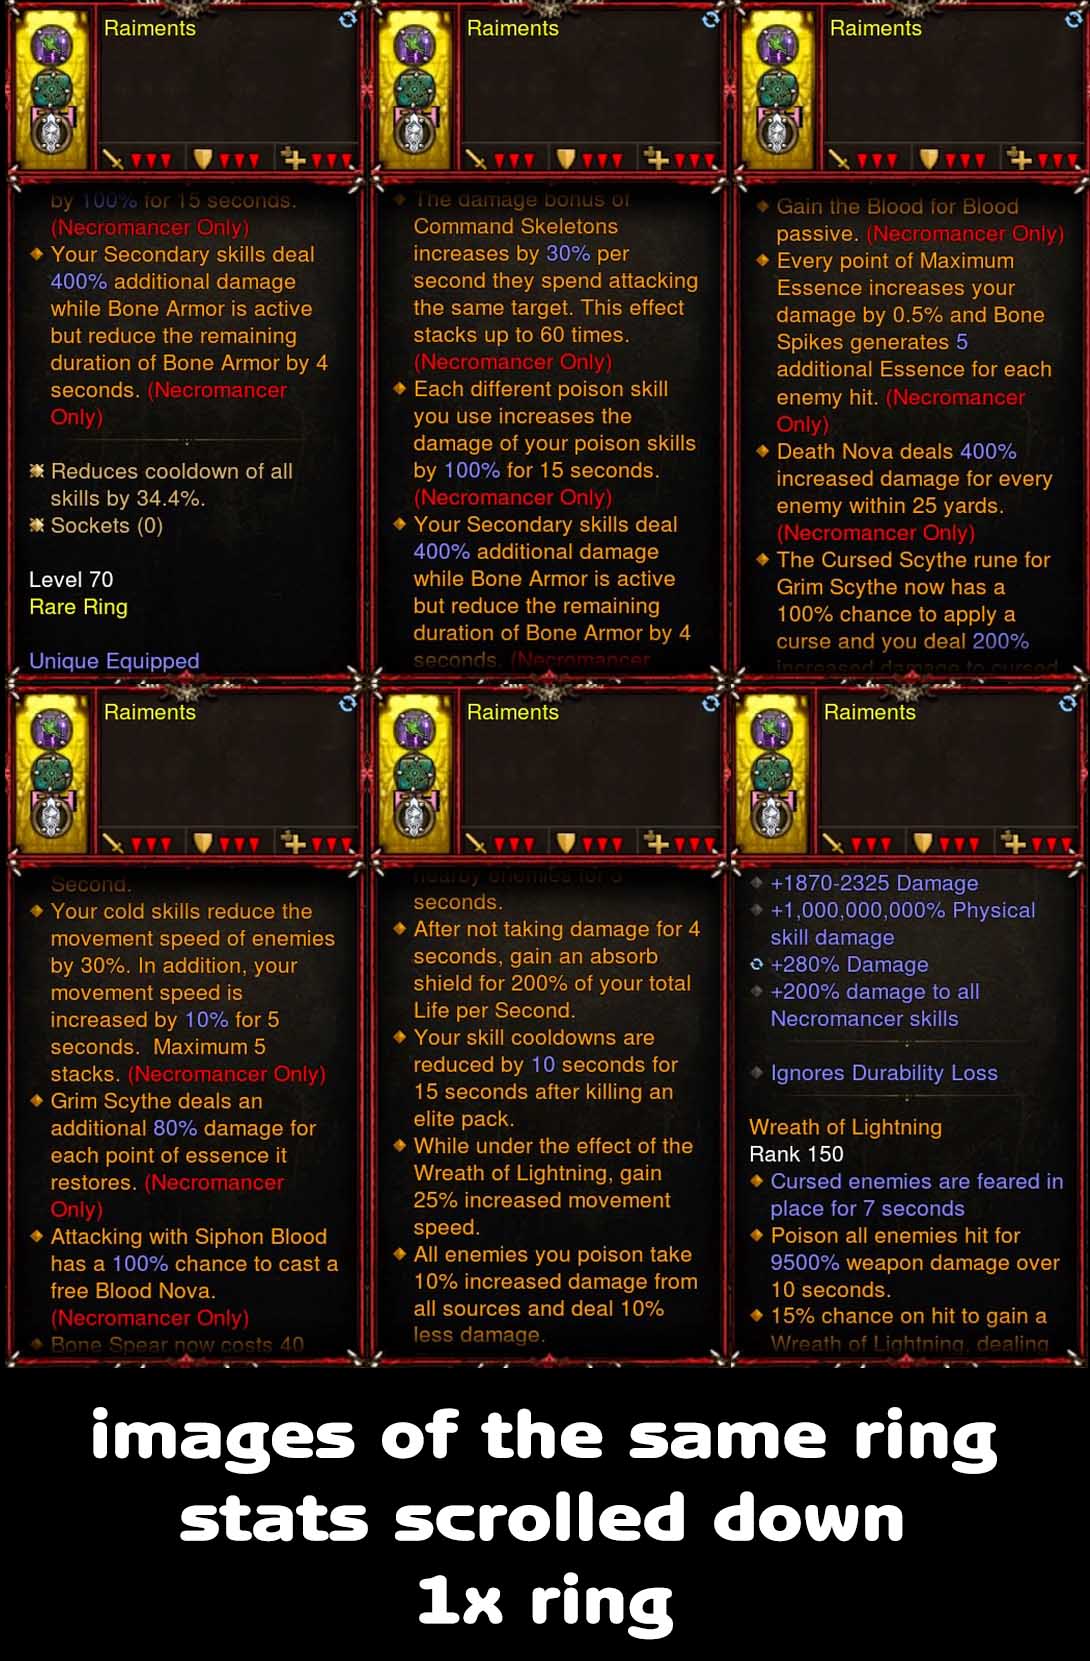 [Primal-Ethereal Infused] Legendary Affixes 100000000% Ring for Necromancer Raiments Diablo 3 Mods ROS Seasonal and Non Seasonal Save Mod - Modded Items and Gear - Hacks - Cheats - Trainers for Playstation 4 - Playstation 5 - Nintendo Switch - Xbox One